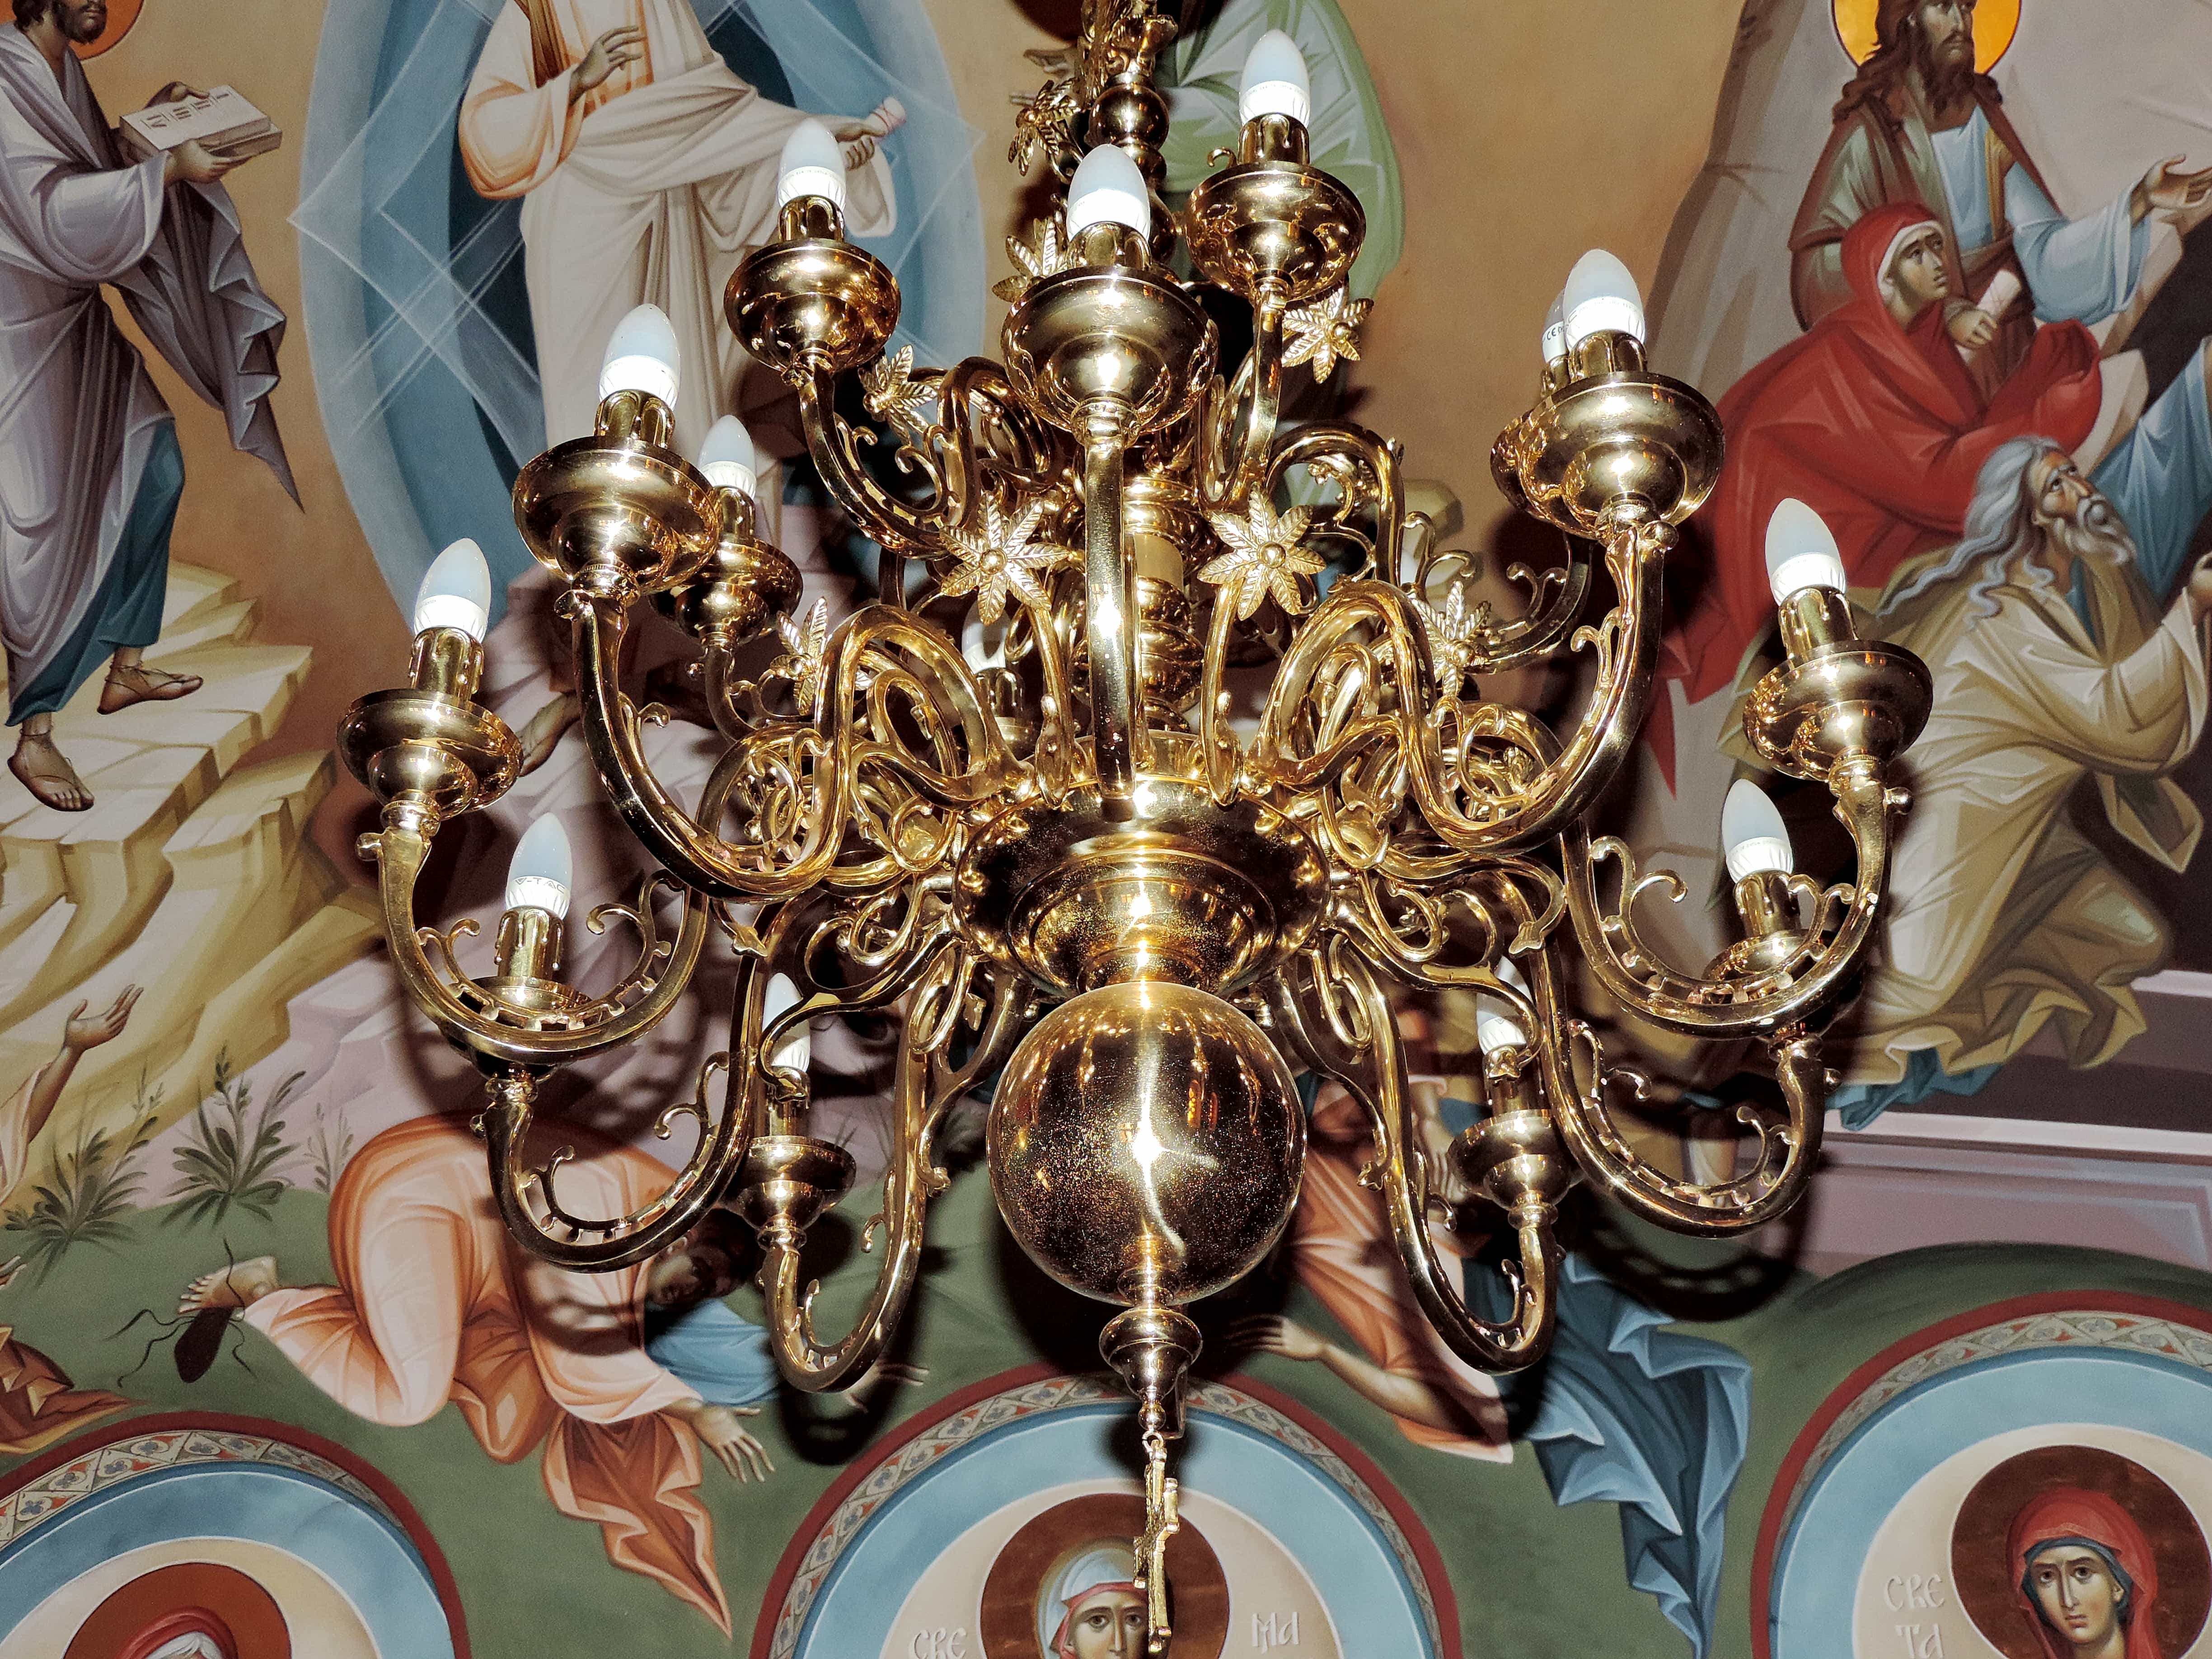 Free picture: chandelier, religion, decoration, gold, christmas, church ...